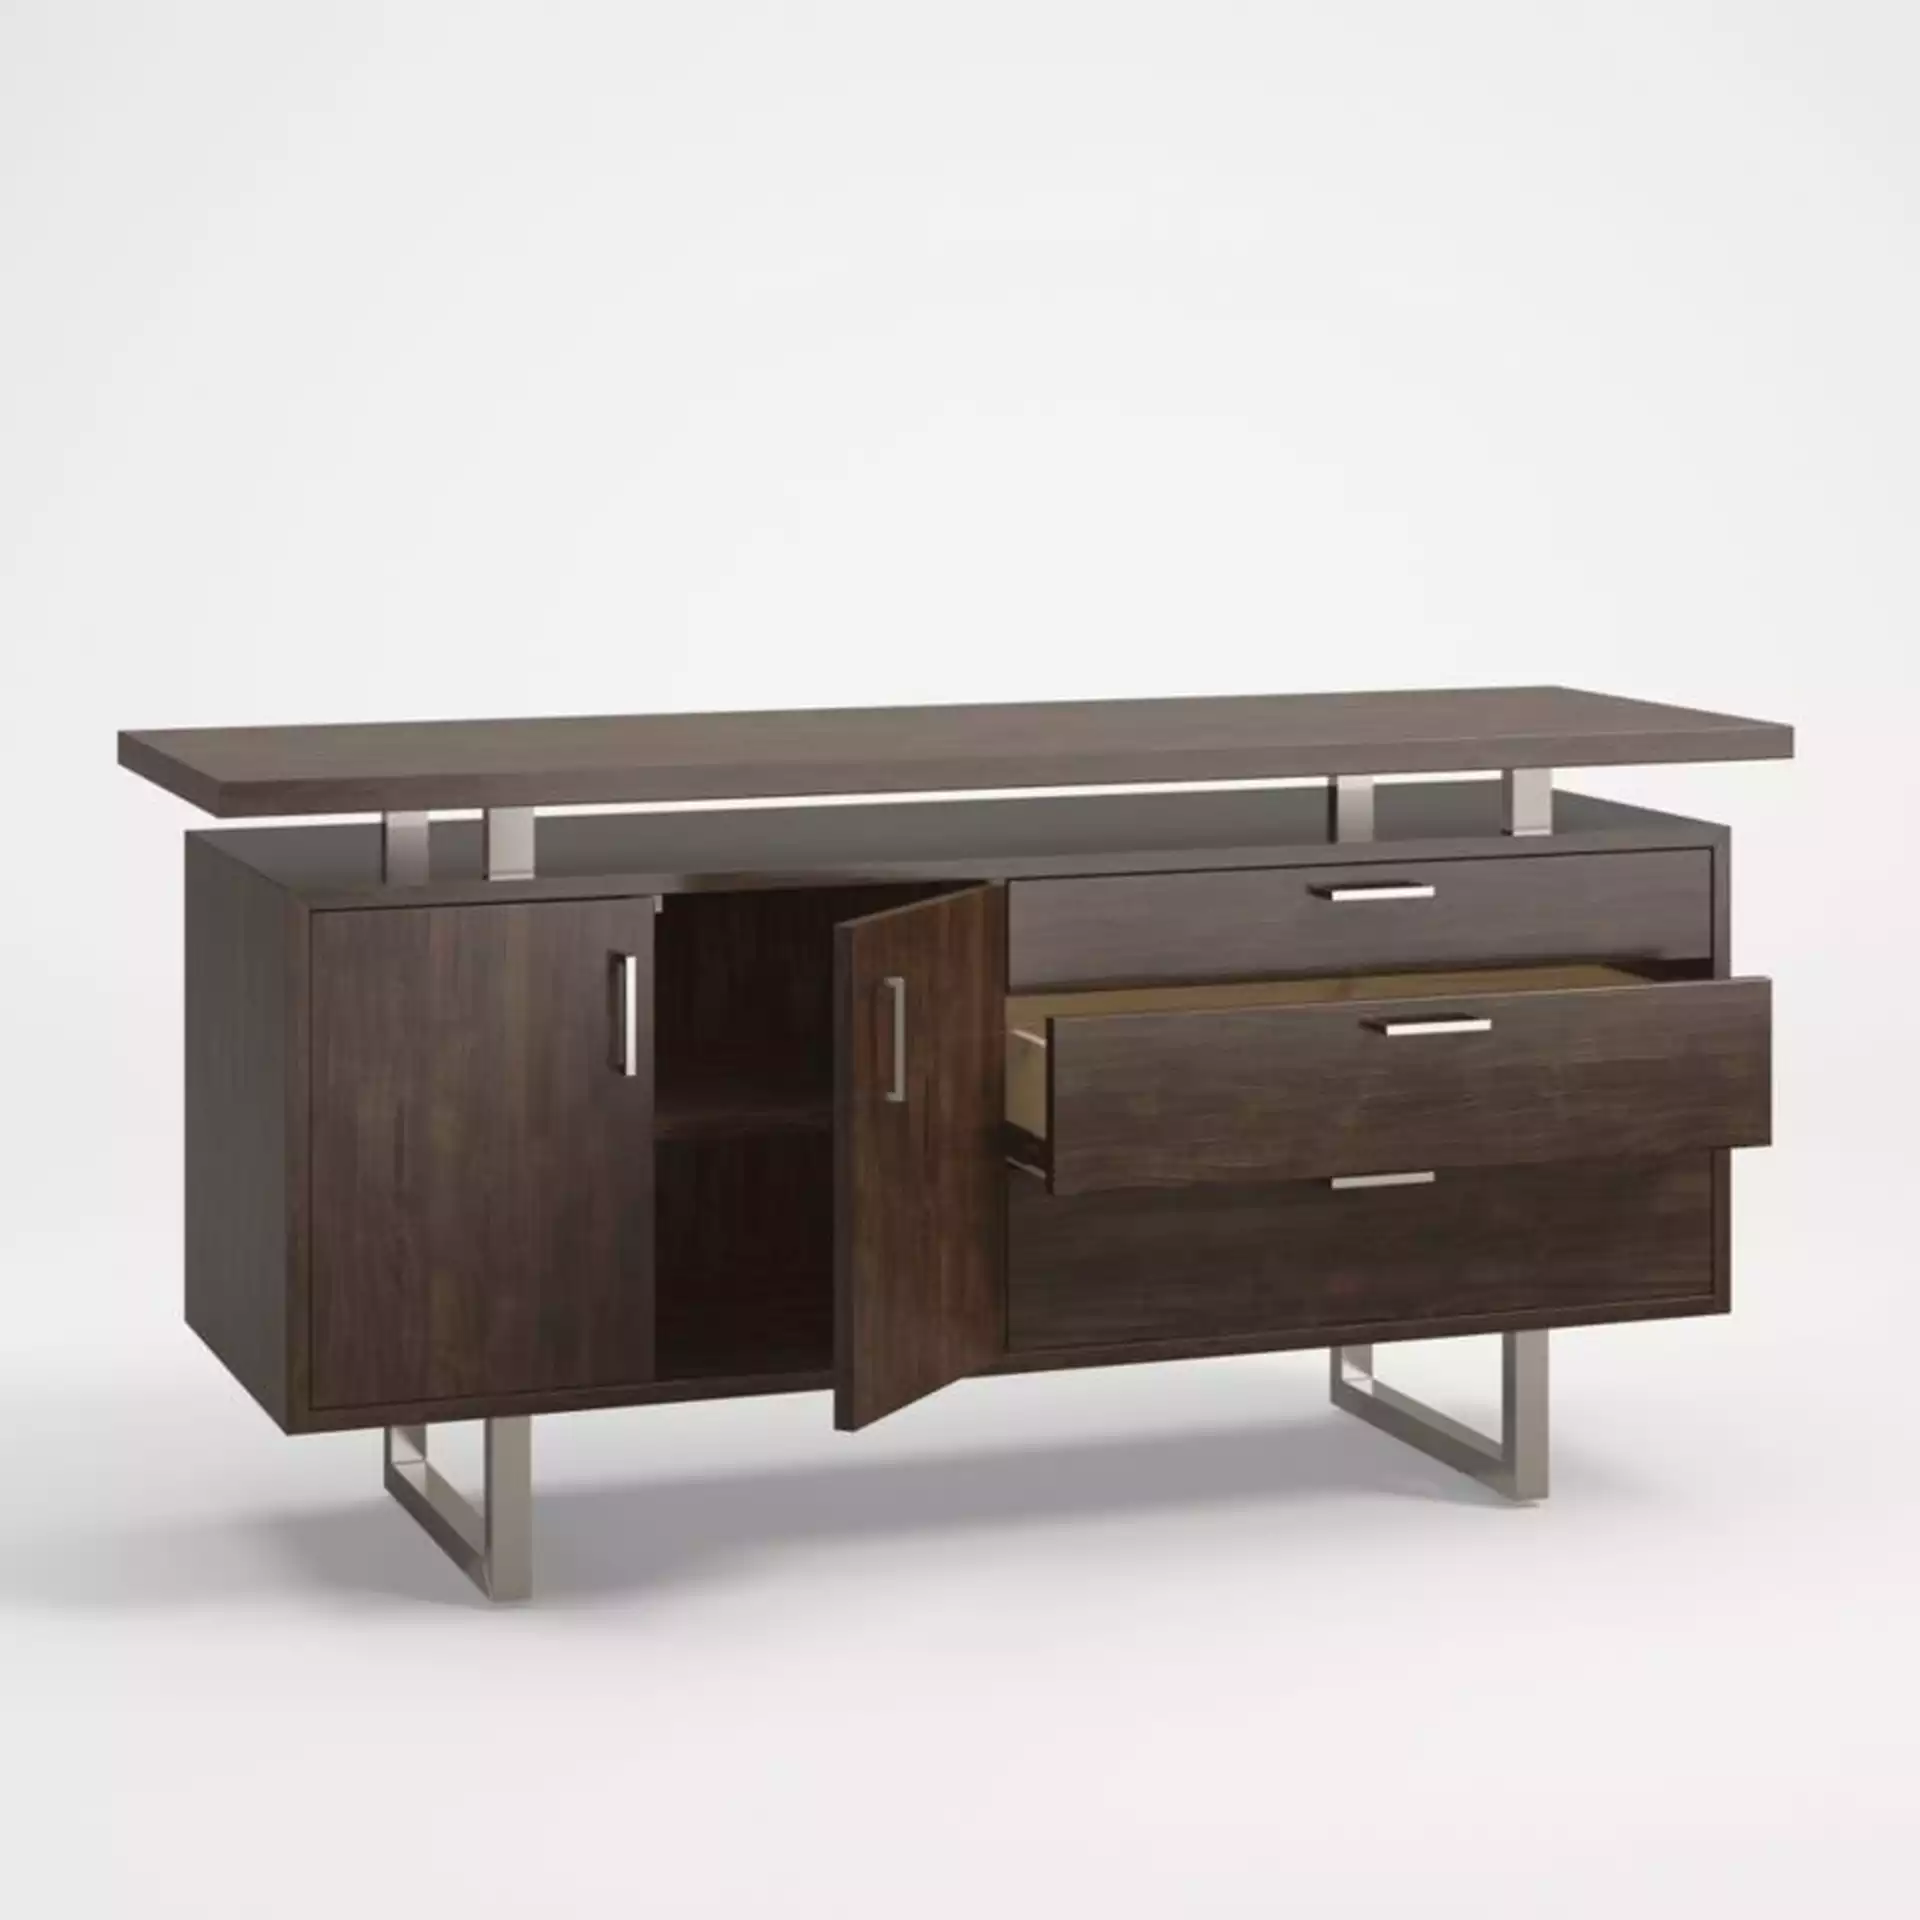 Clybourn Charcoal Cherry Credenza